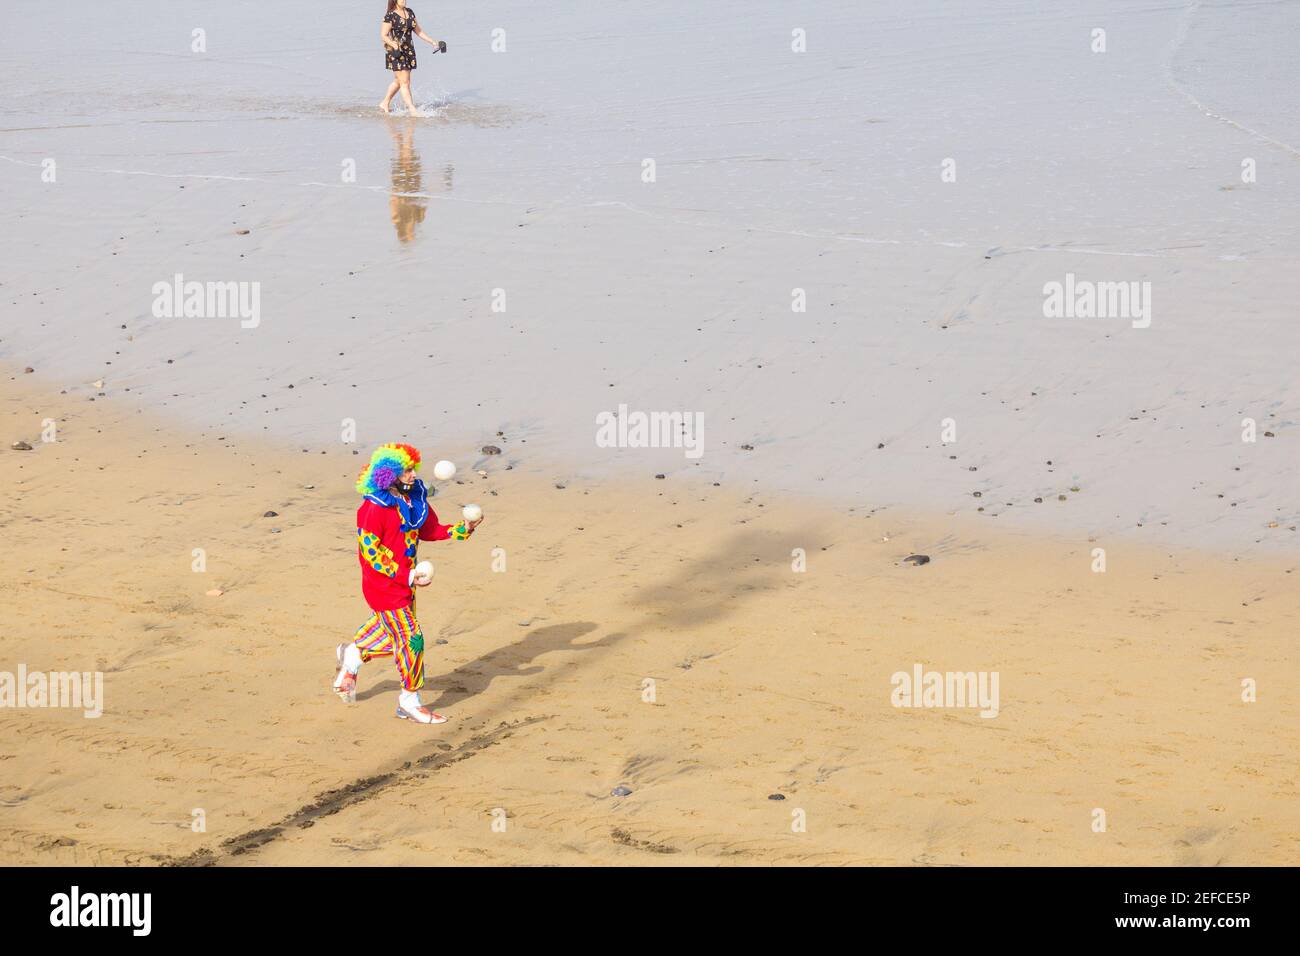 Las Palmas, Gran Canaria, Canary Islands, Spain. 17th February, 2021. Despite the cancellation of the month long carnival in Las Palmas (due to Covid), people still head out in costumes, like this clown juggling on the city beach with temperatures close to 30 degrees Celsius. Credit: Alan Dawson/Alamy Live News. Stock Photo